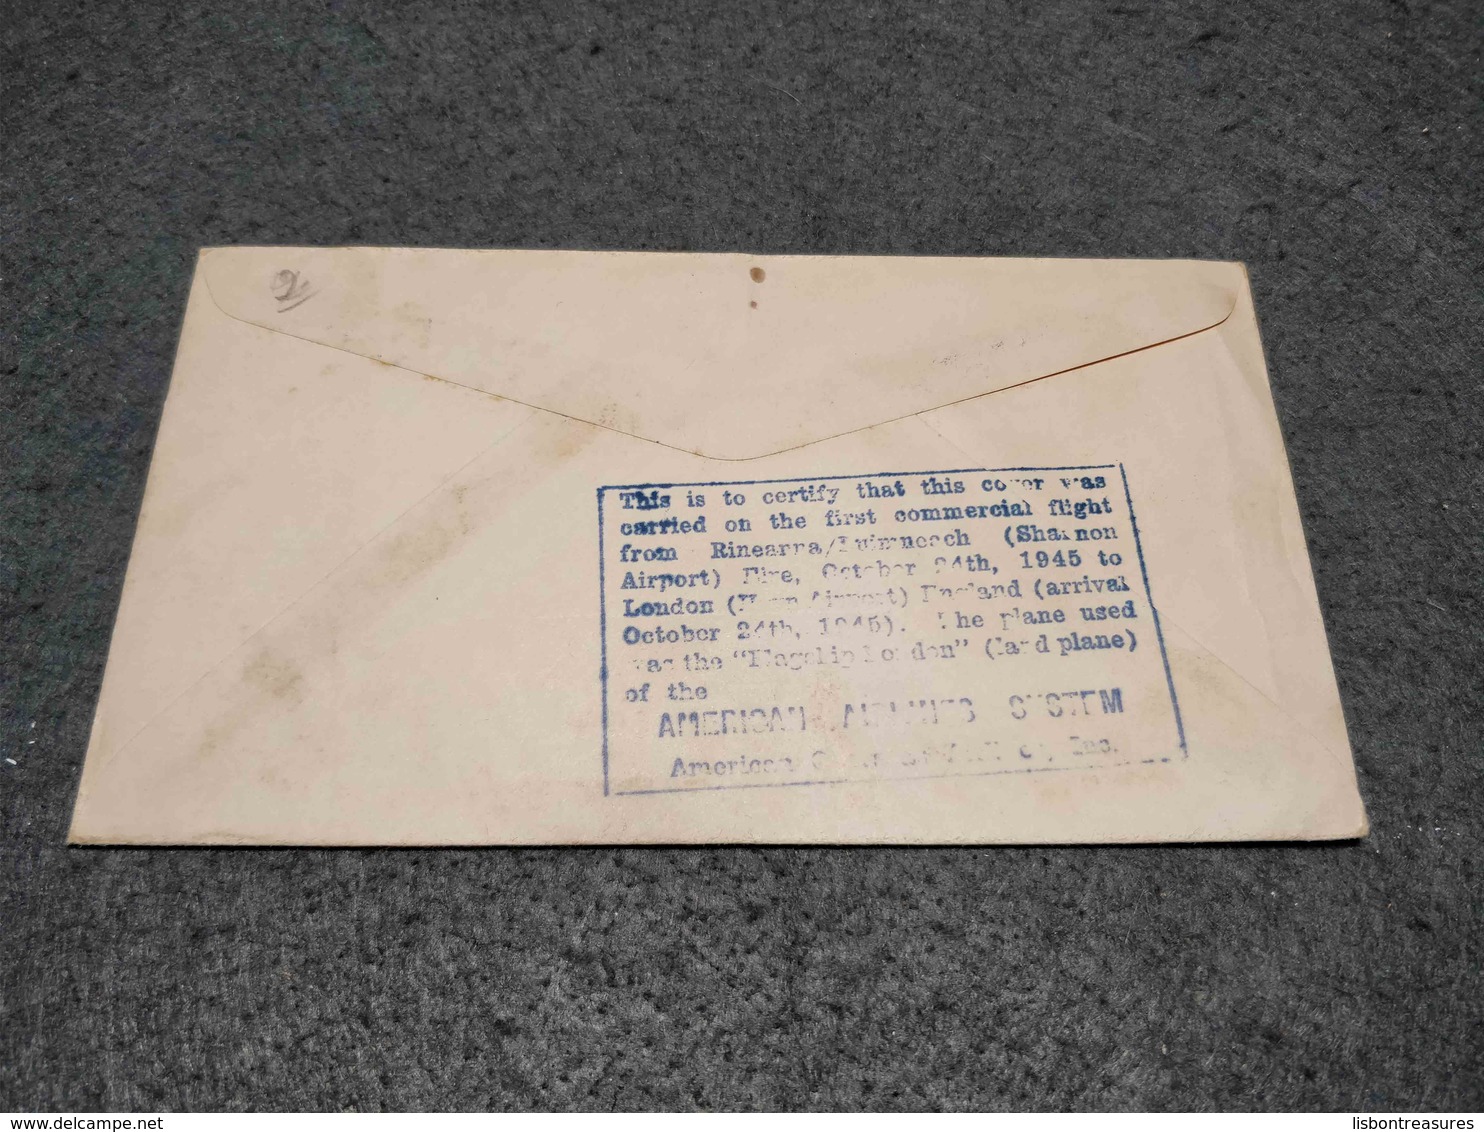 RARE IRELAND FFC AMERICAN AIRLINES SYSTEM LEAVE AND RETURN ON SAME DAY RINEARRA AIRPORT - TO LONDON 1945 - Airmail